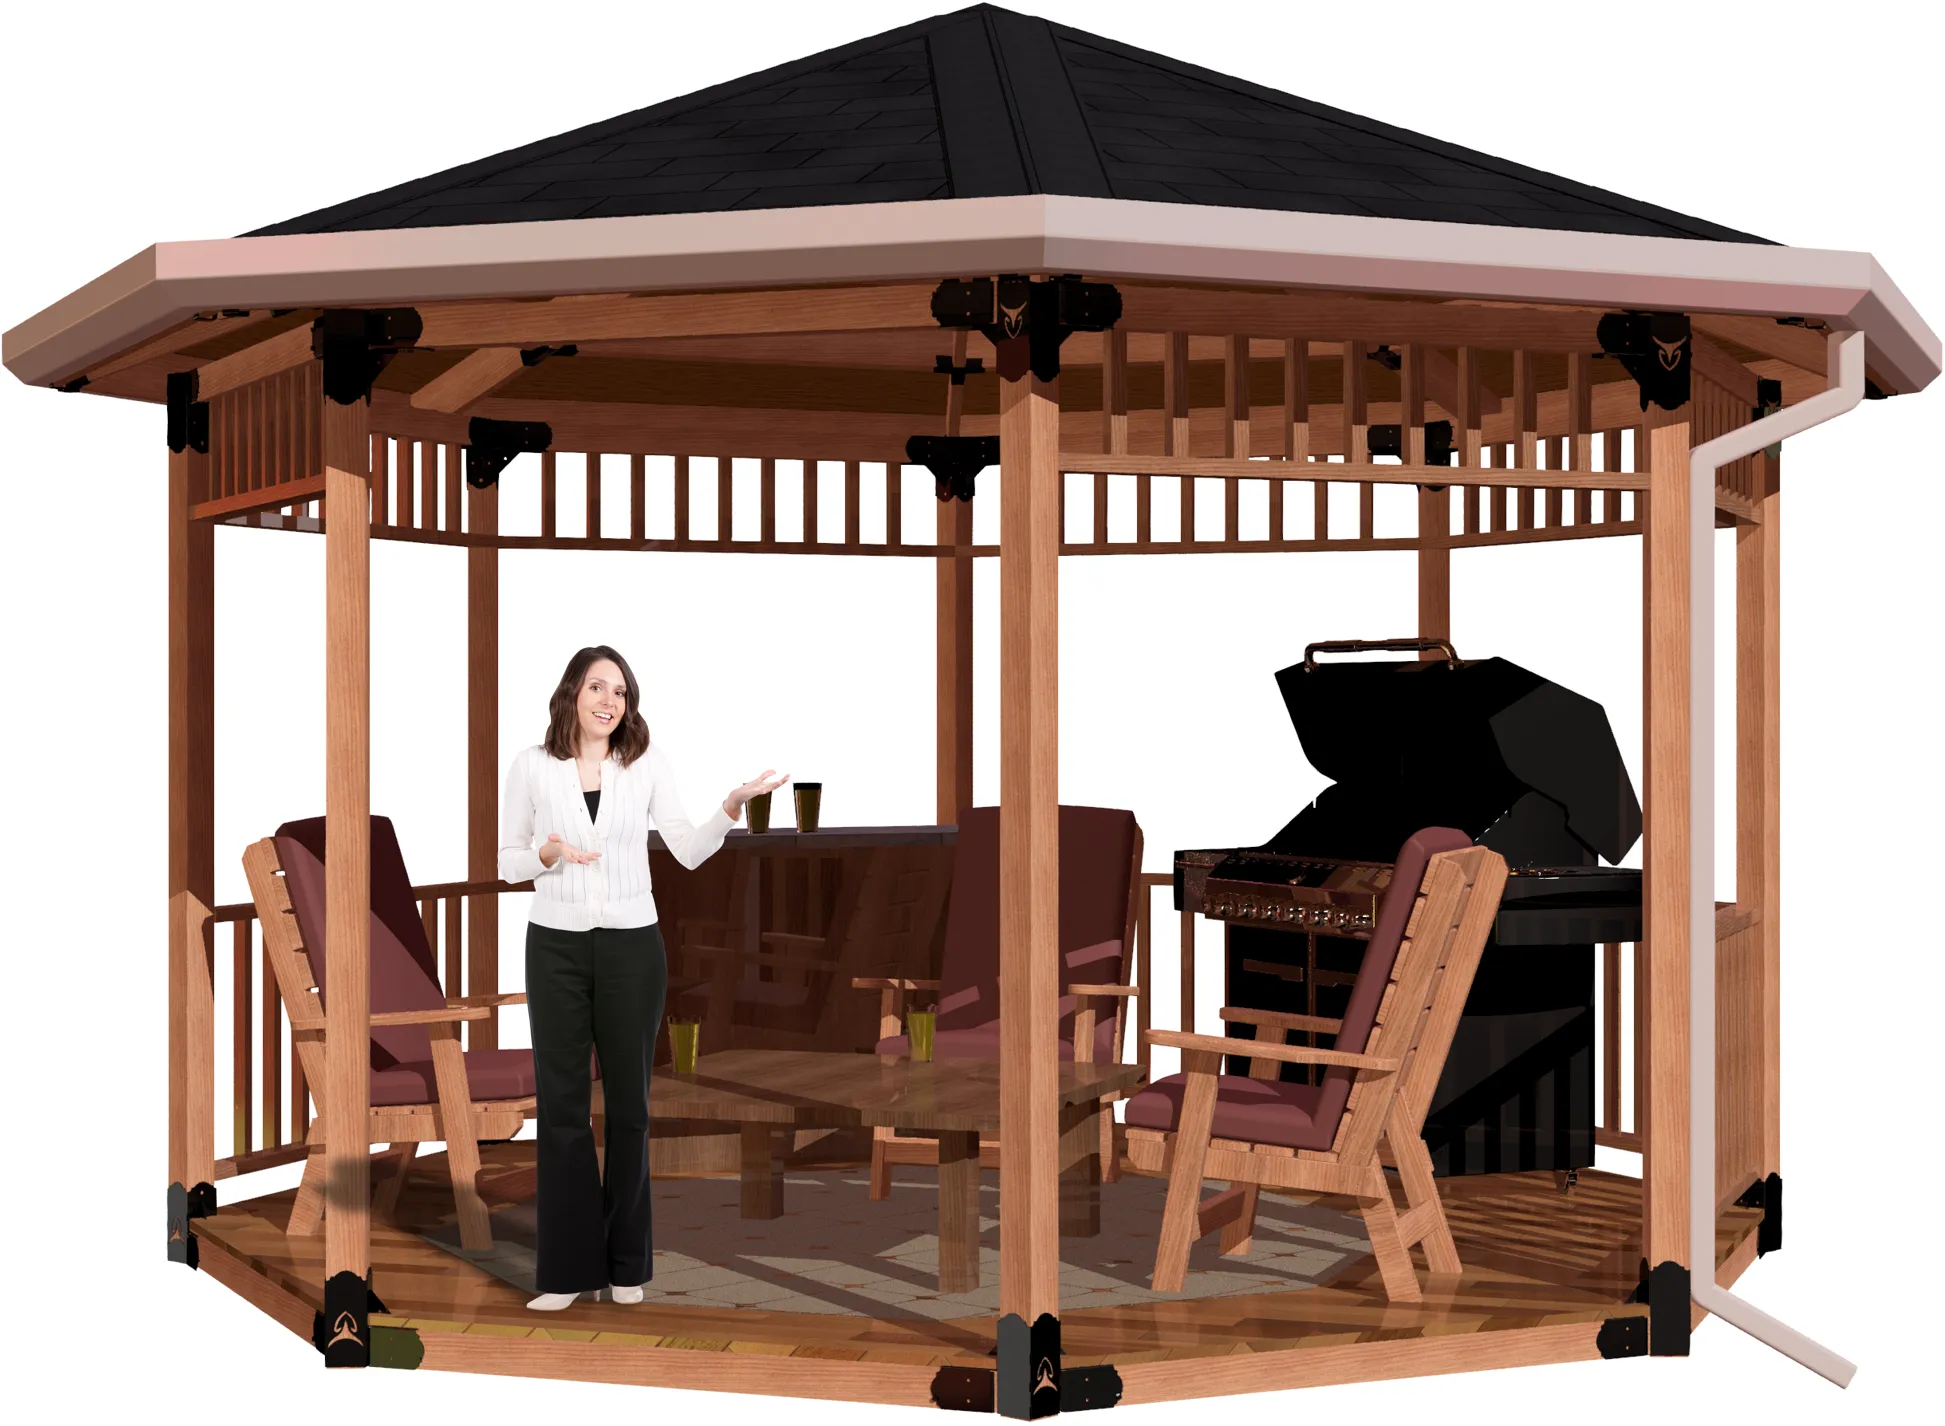 view of a 4x4 floating deck octagon patio cover with solid roof. A bar, barbecue, and casual furniture inside and a girl standing smiling.